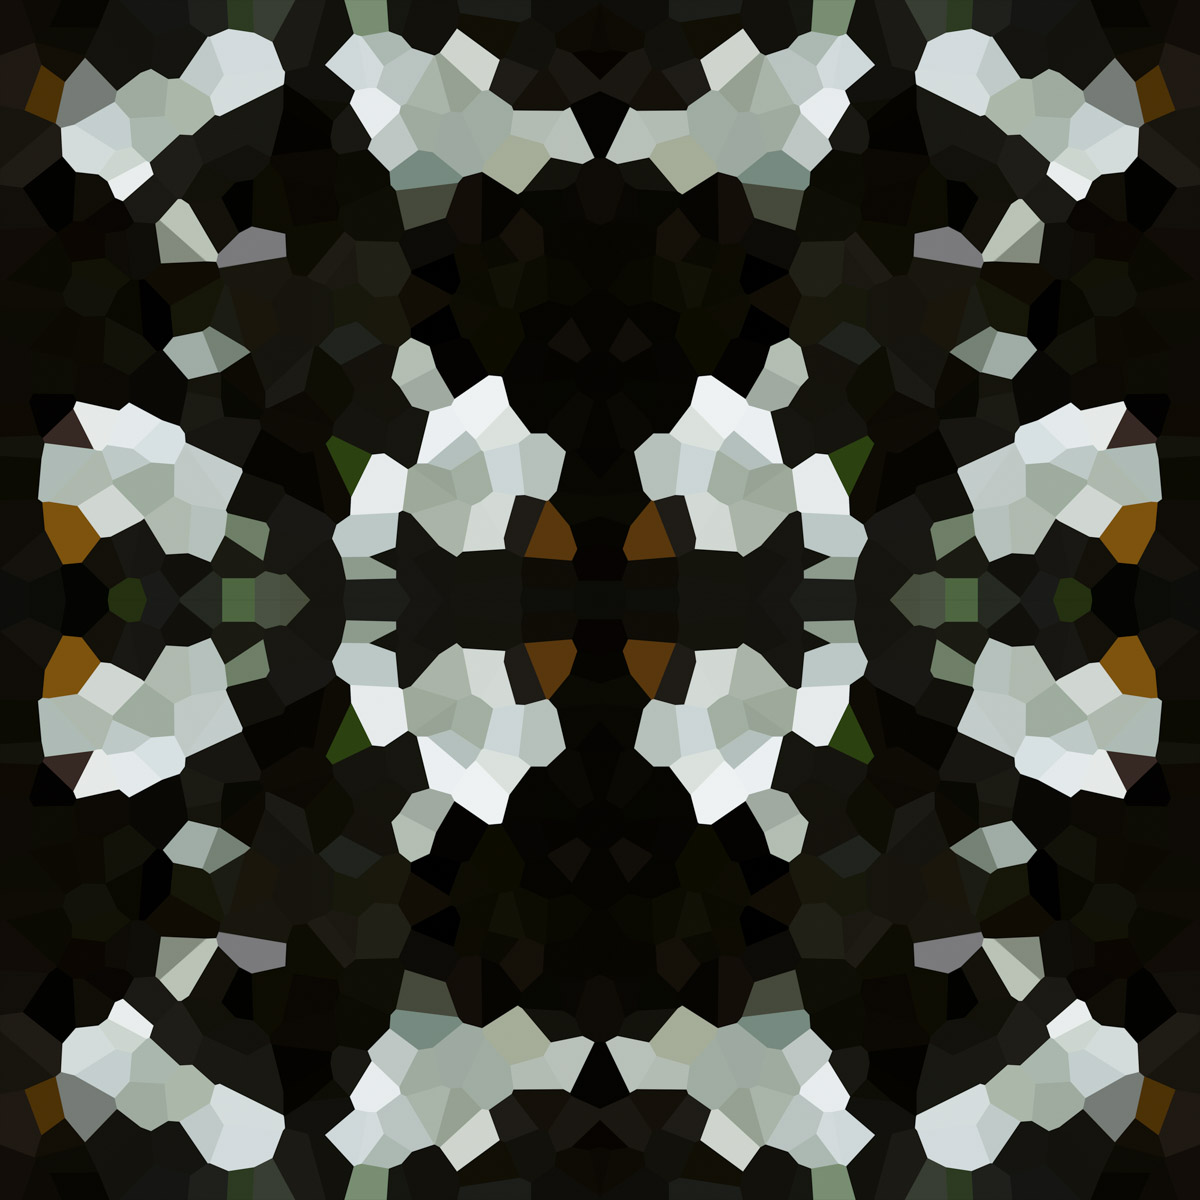 A black and white abstract image with many shapes.